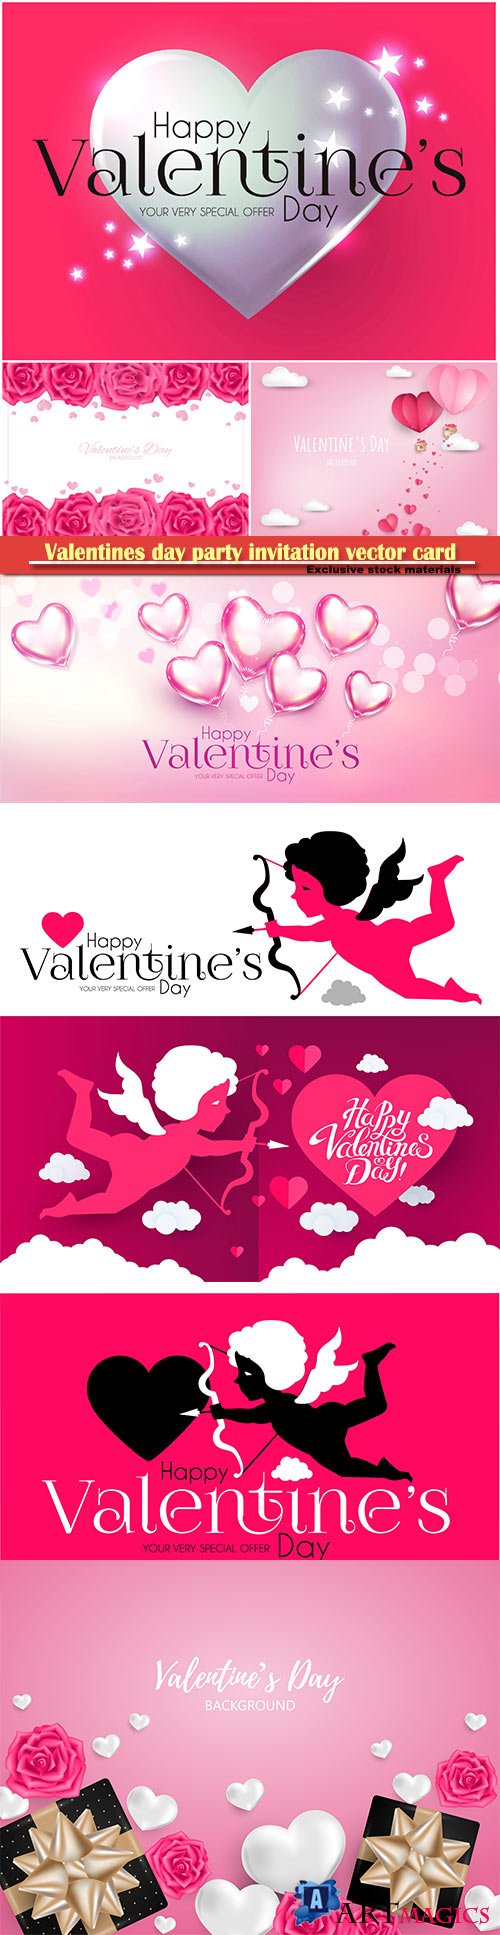 Valentines day party invitation vector card # 41